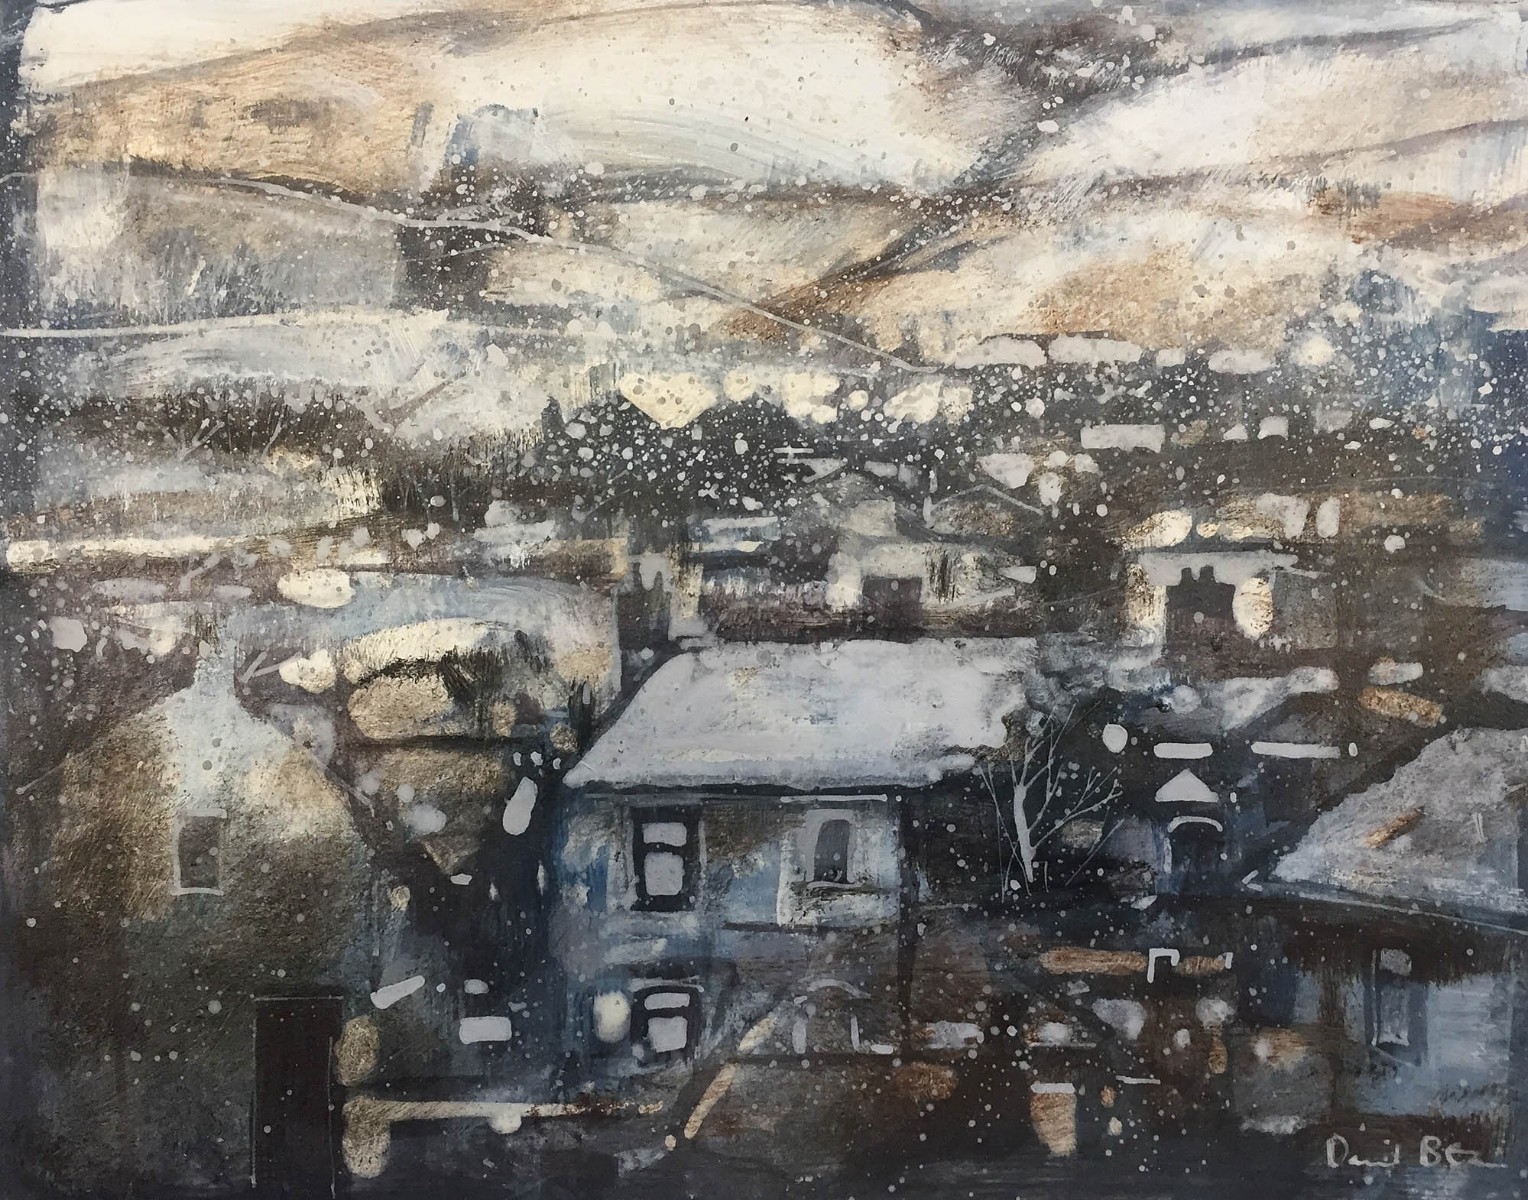 Settling in Town by David Bez